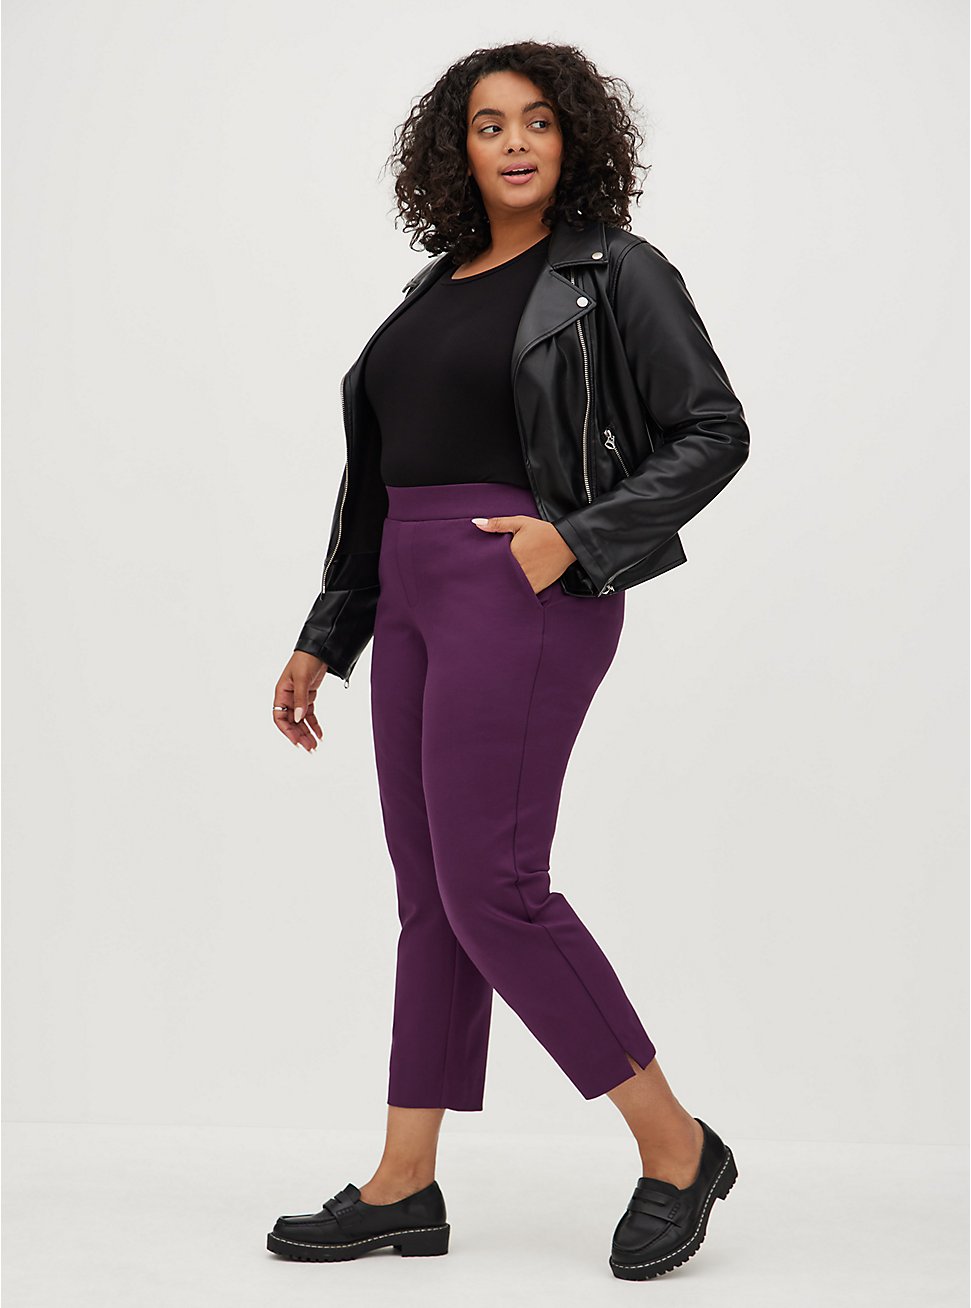 Plus Size Pull-On Tapered Pant - Luxe Ponte Purple, PURPLE, hi-res